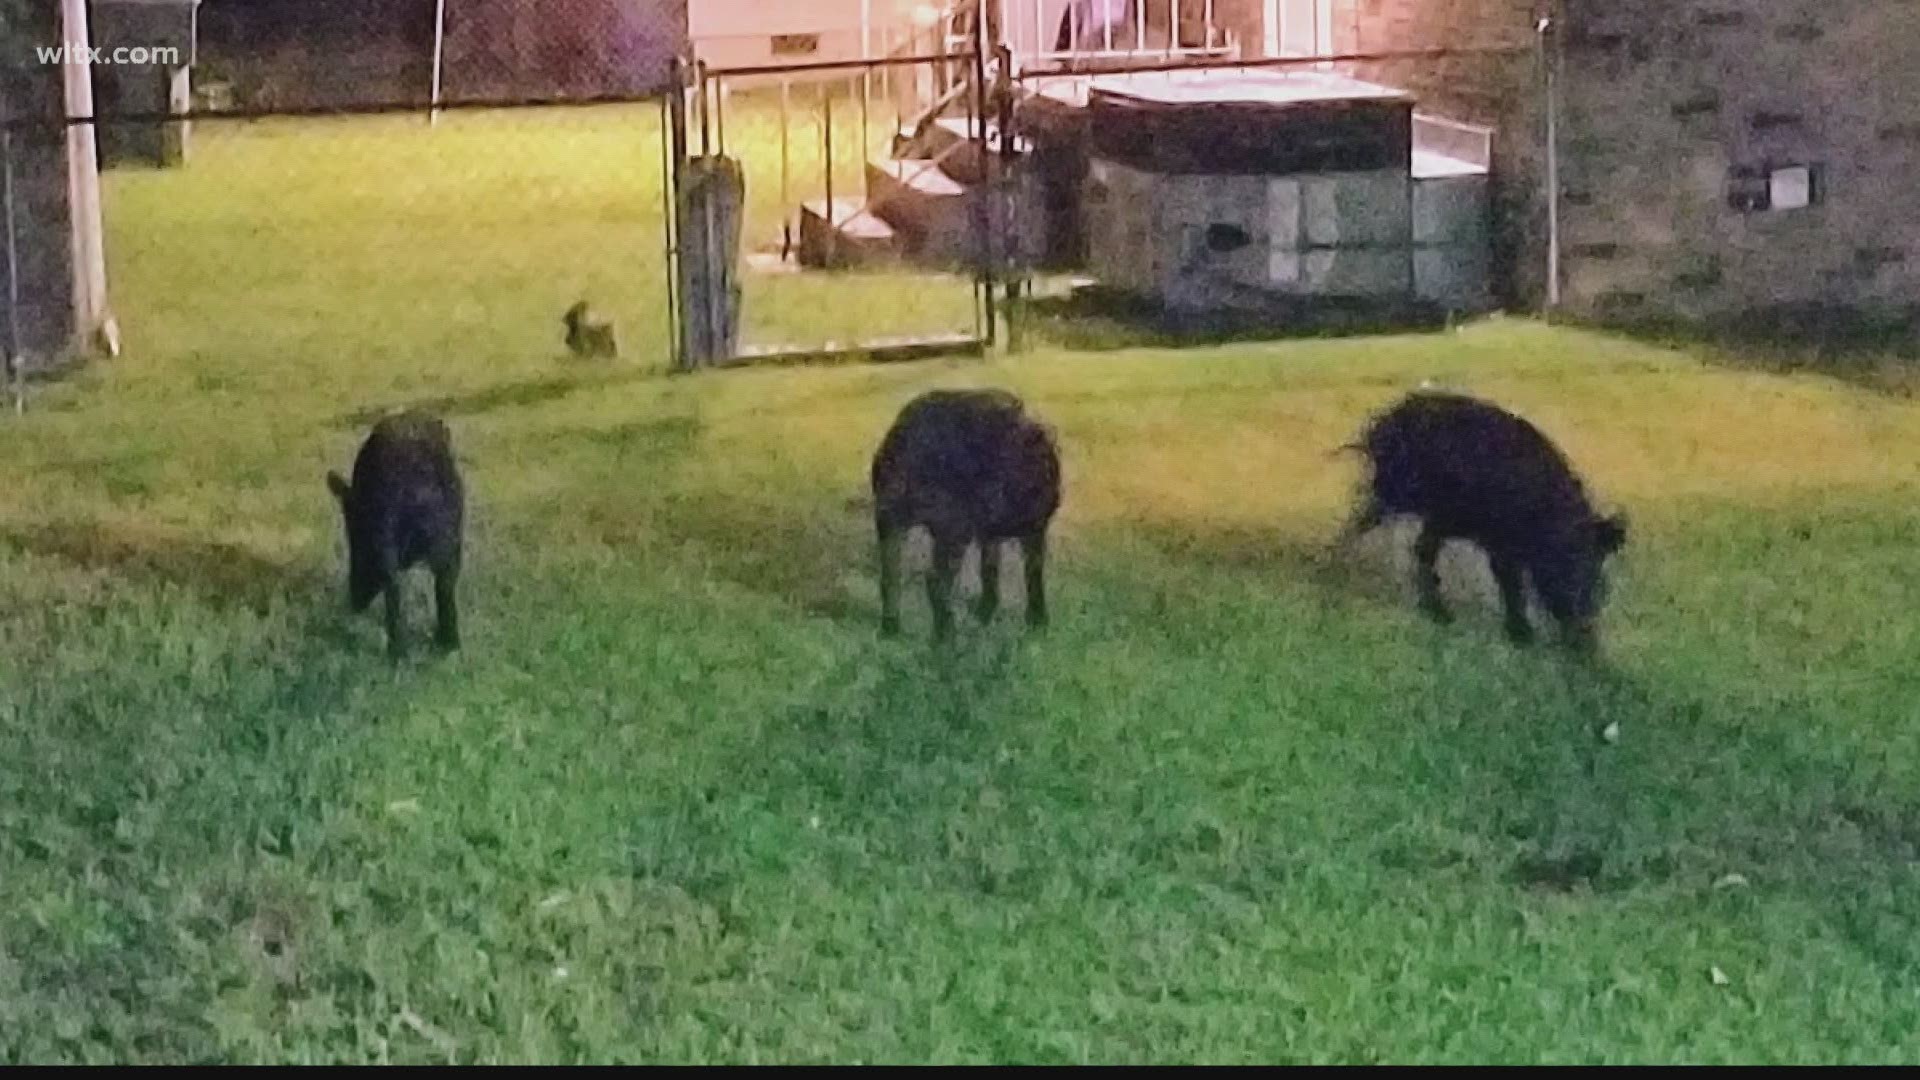 One woman in Columbia said she looked out her window and saw multiple feral hogs in her yard.